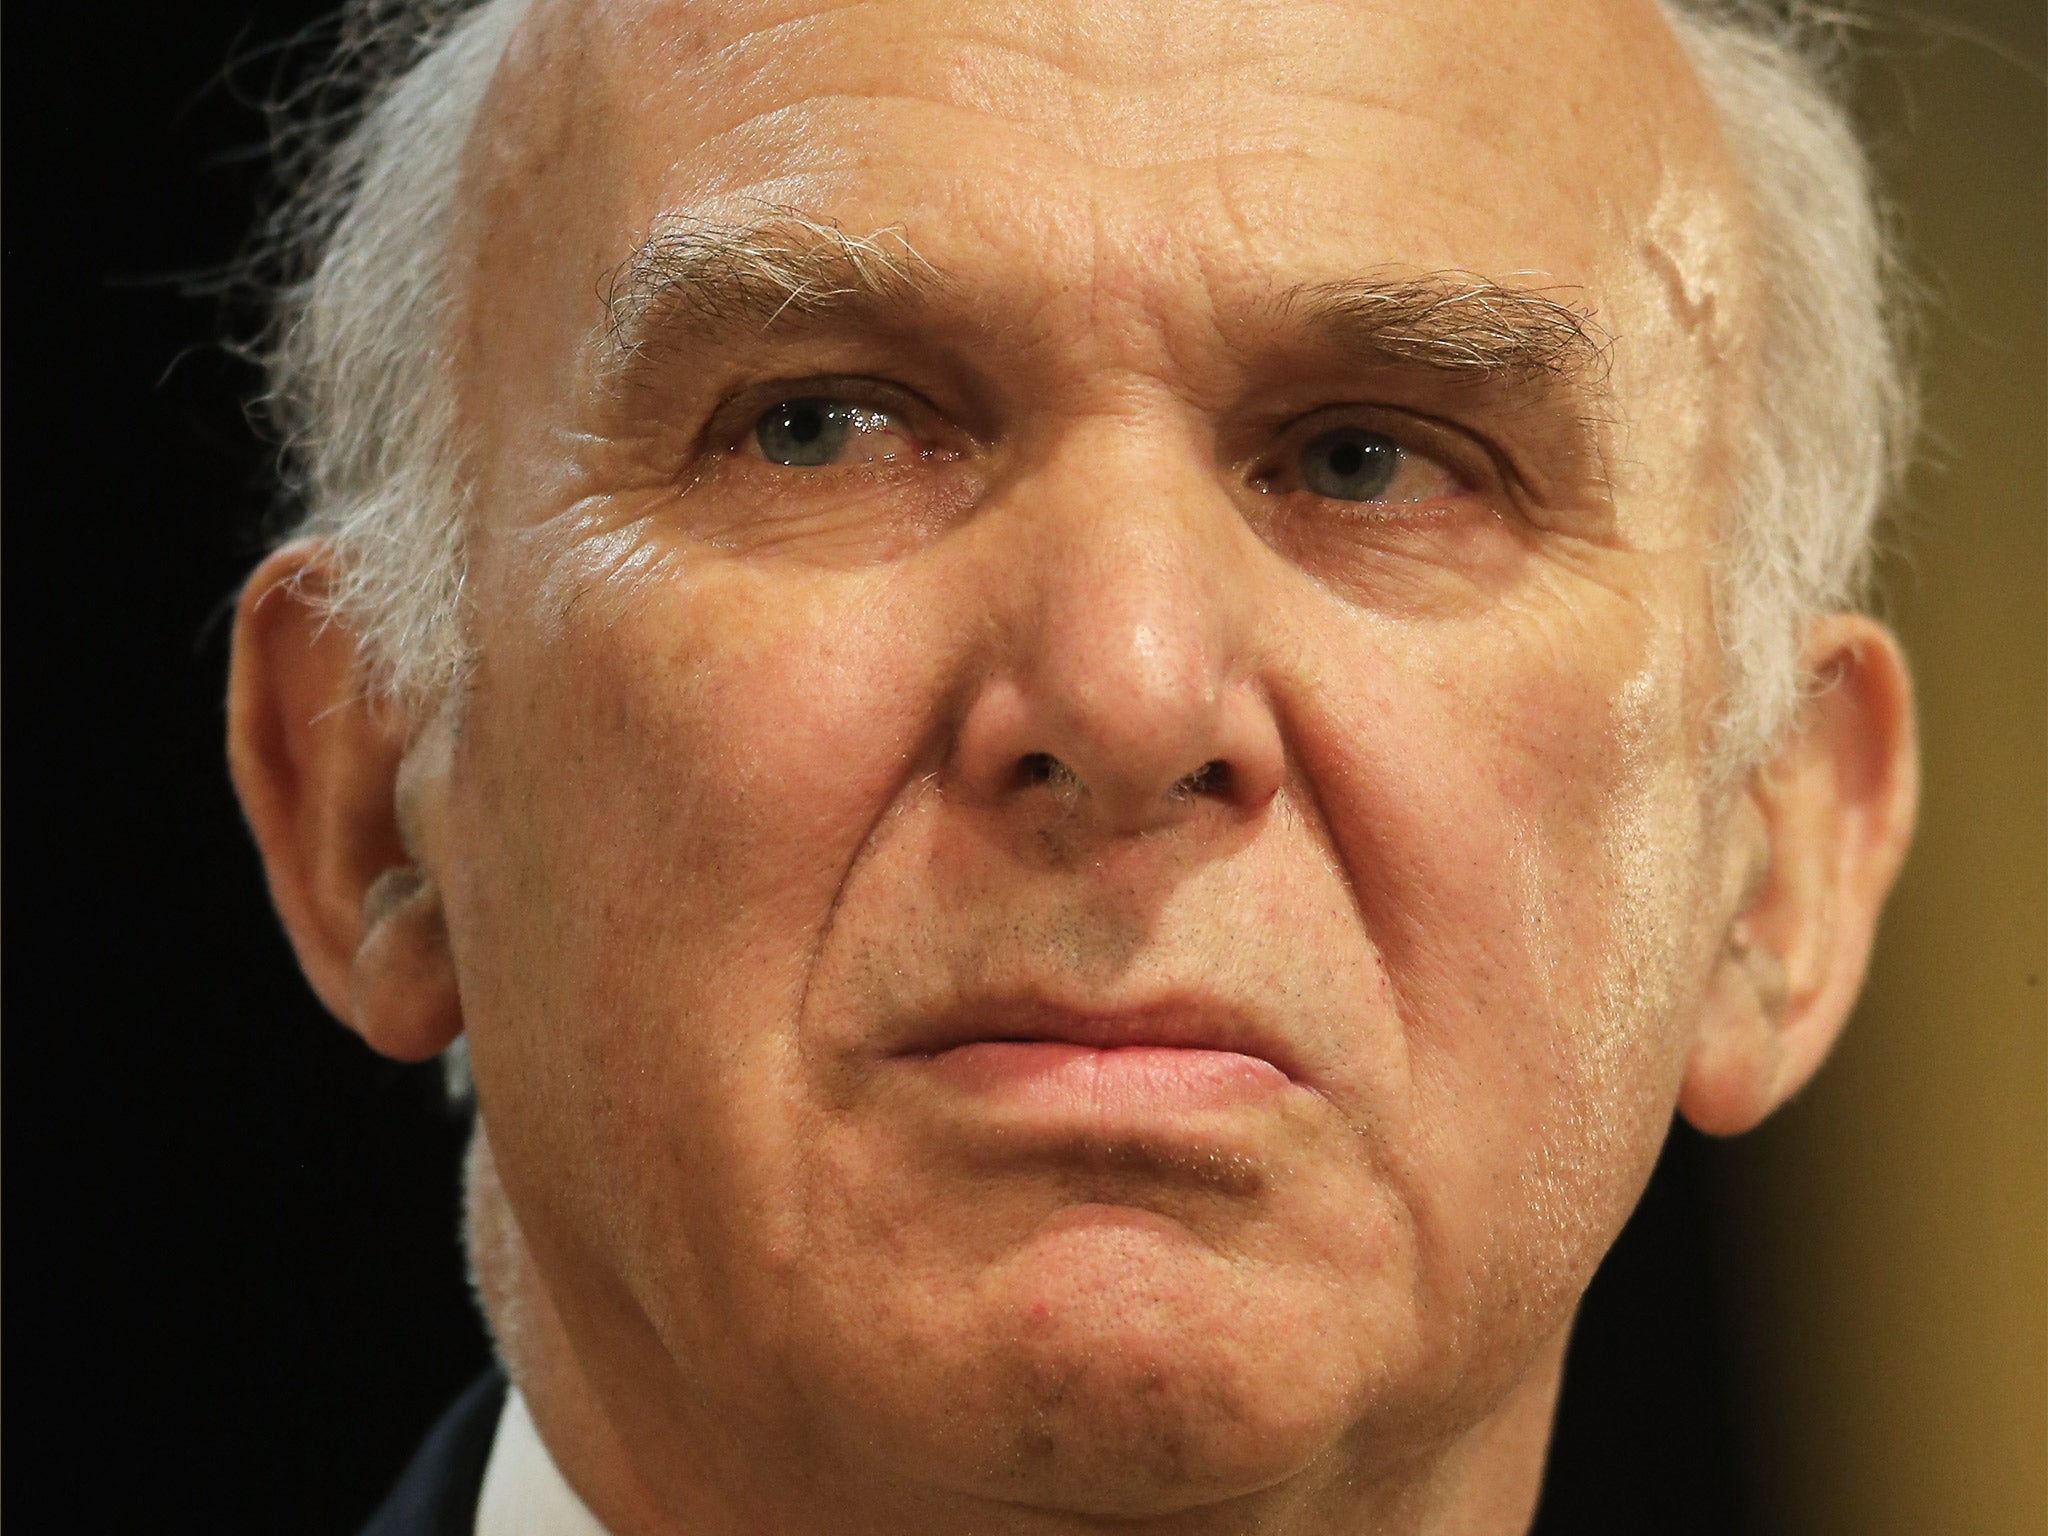 Vince Cable attended ADS dinner in London this week